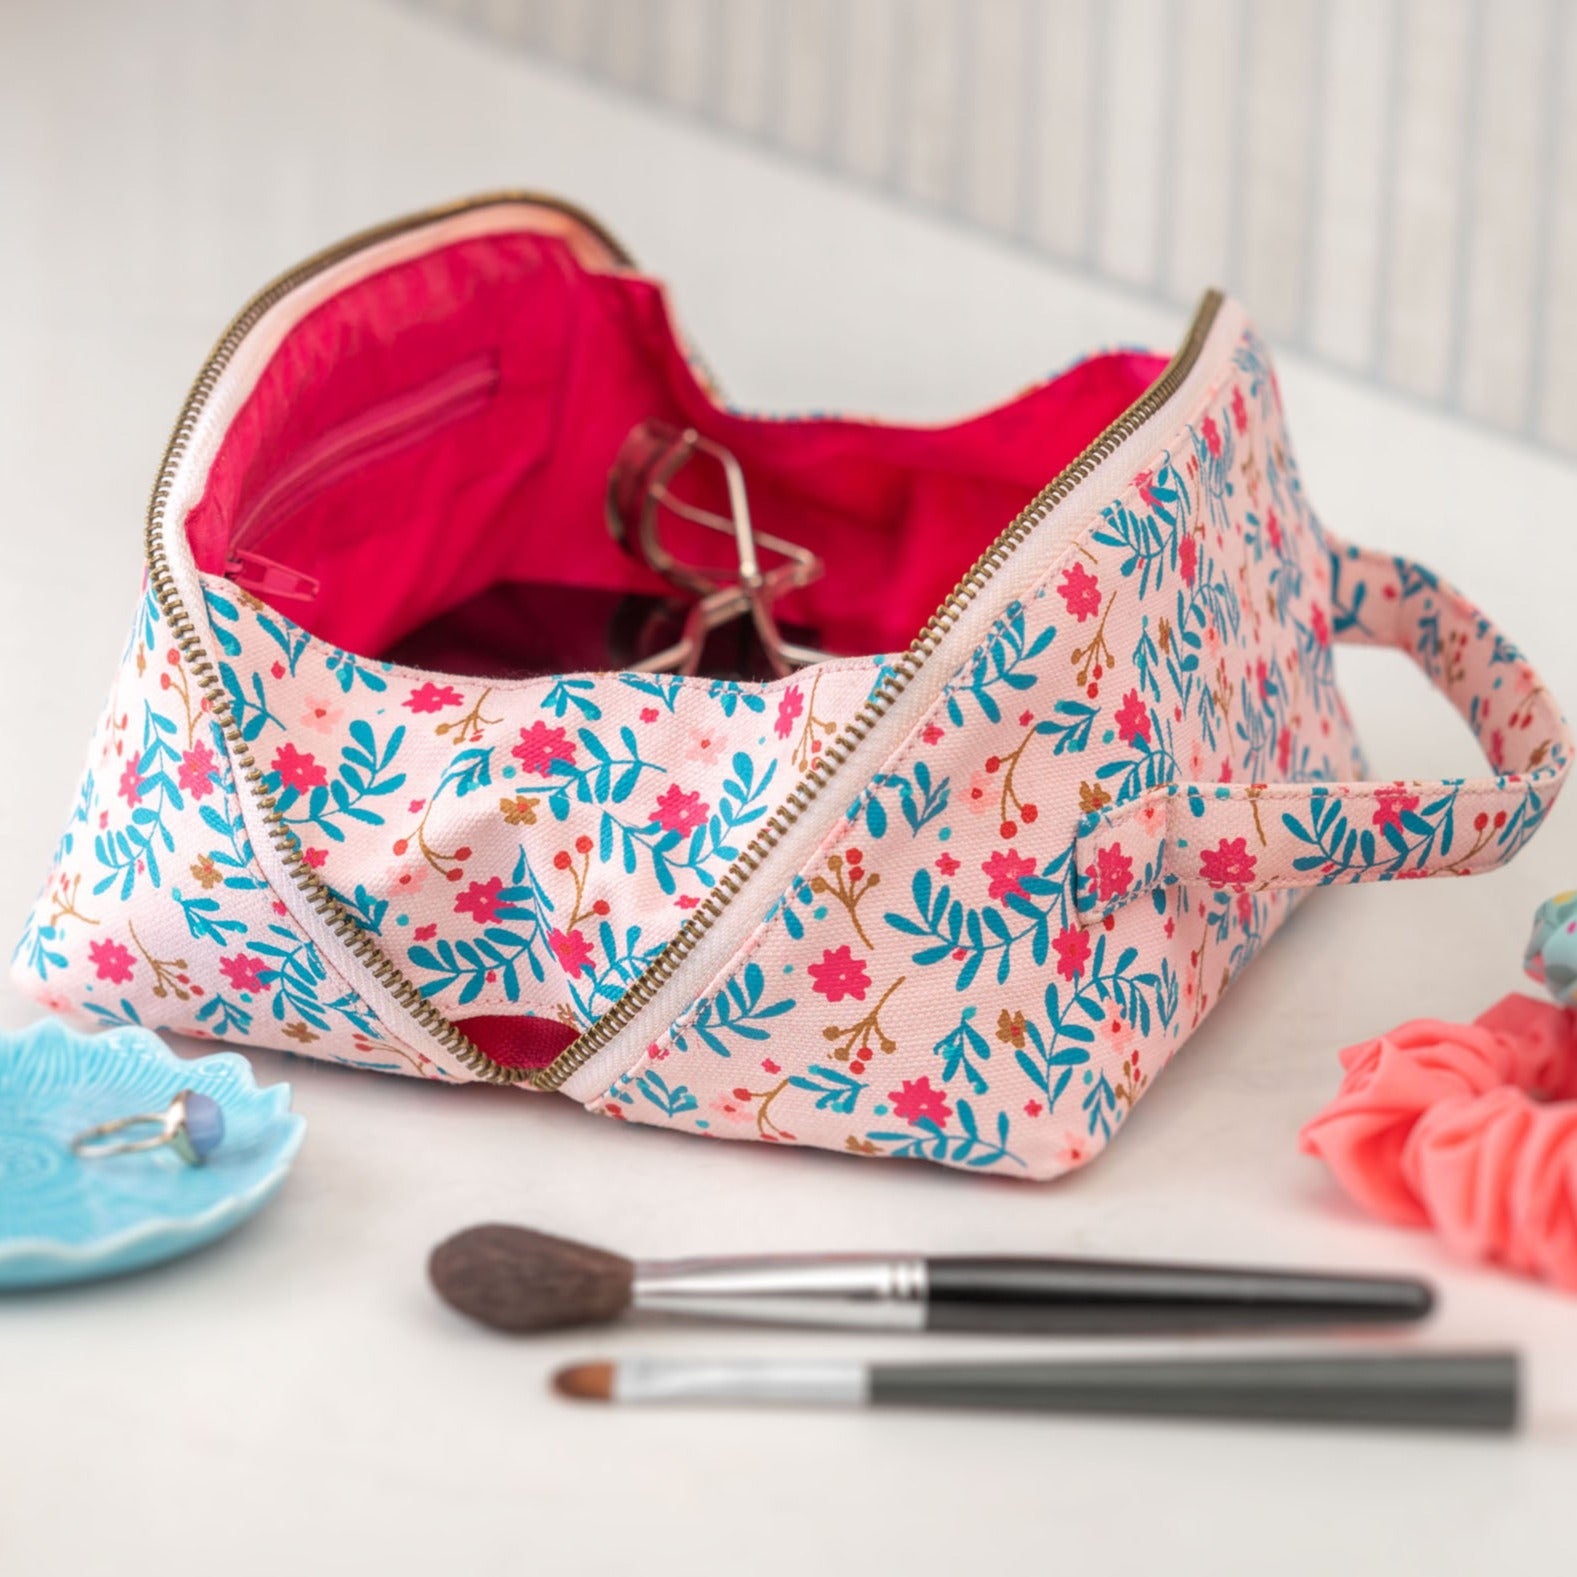 Karma Butterfly Cosmetic Bag